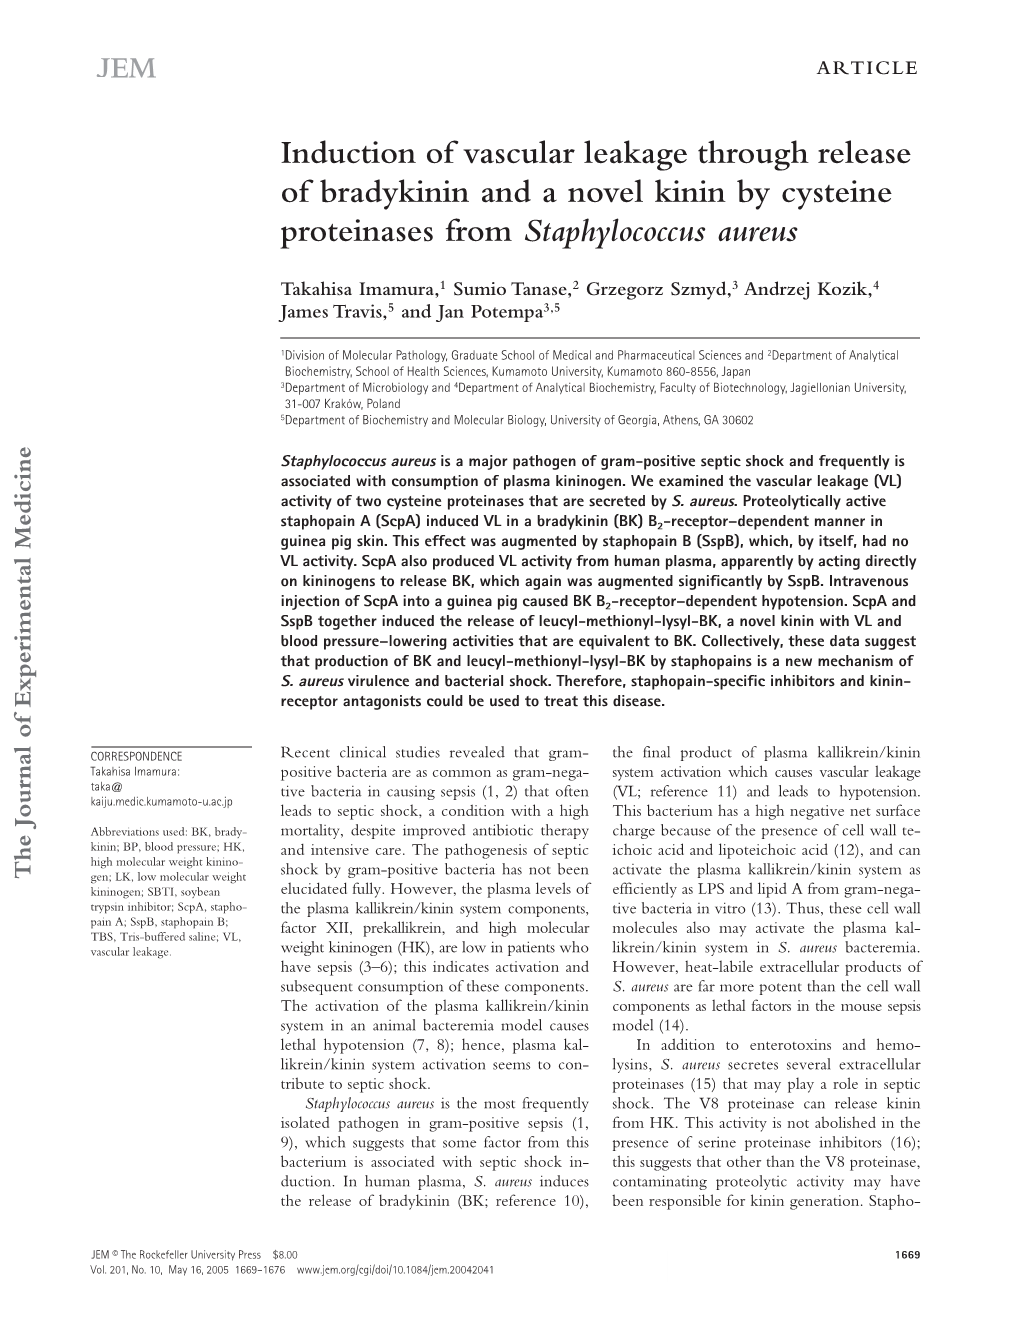 Induction of Vascular Leakage Through Release of Bradykinin and a Novel